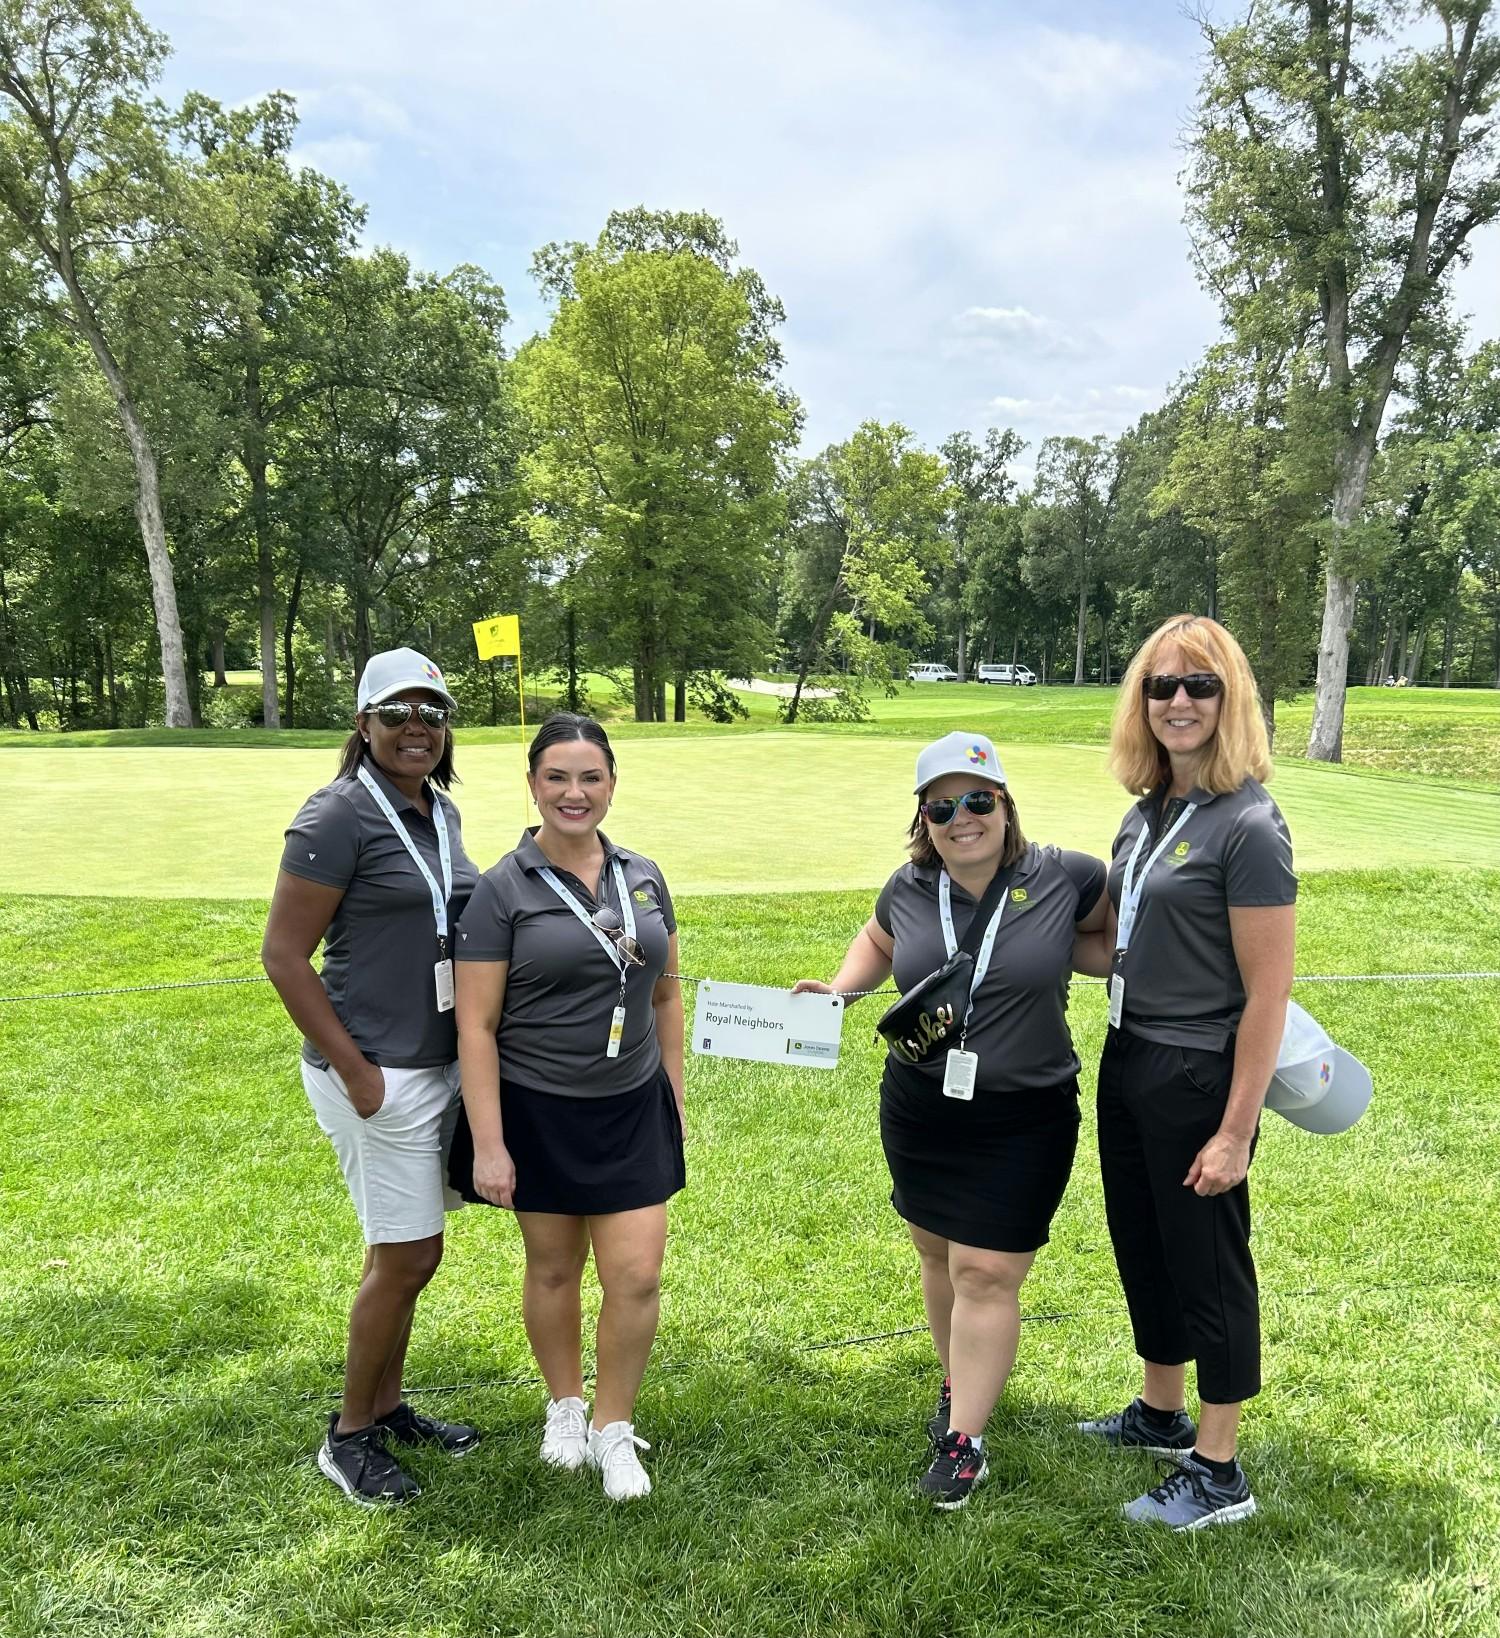 CEO and President, Zarifa Brown Reynolds, volunteered with team members at the John Deere Classic golf tournament.